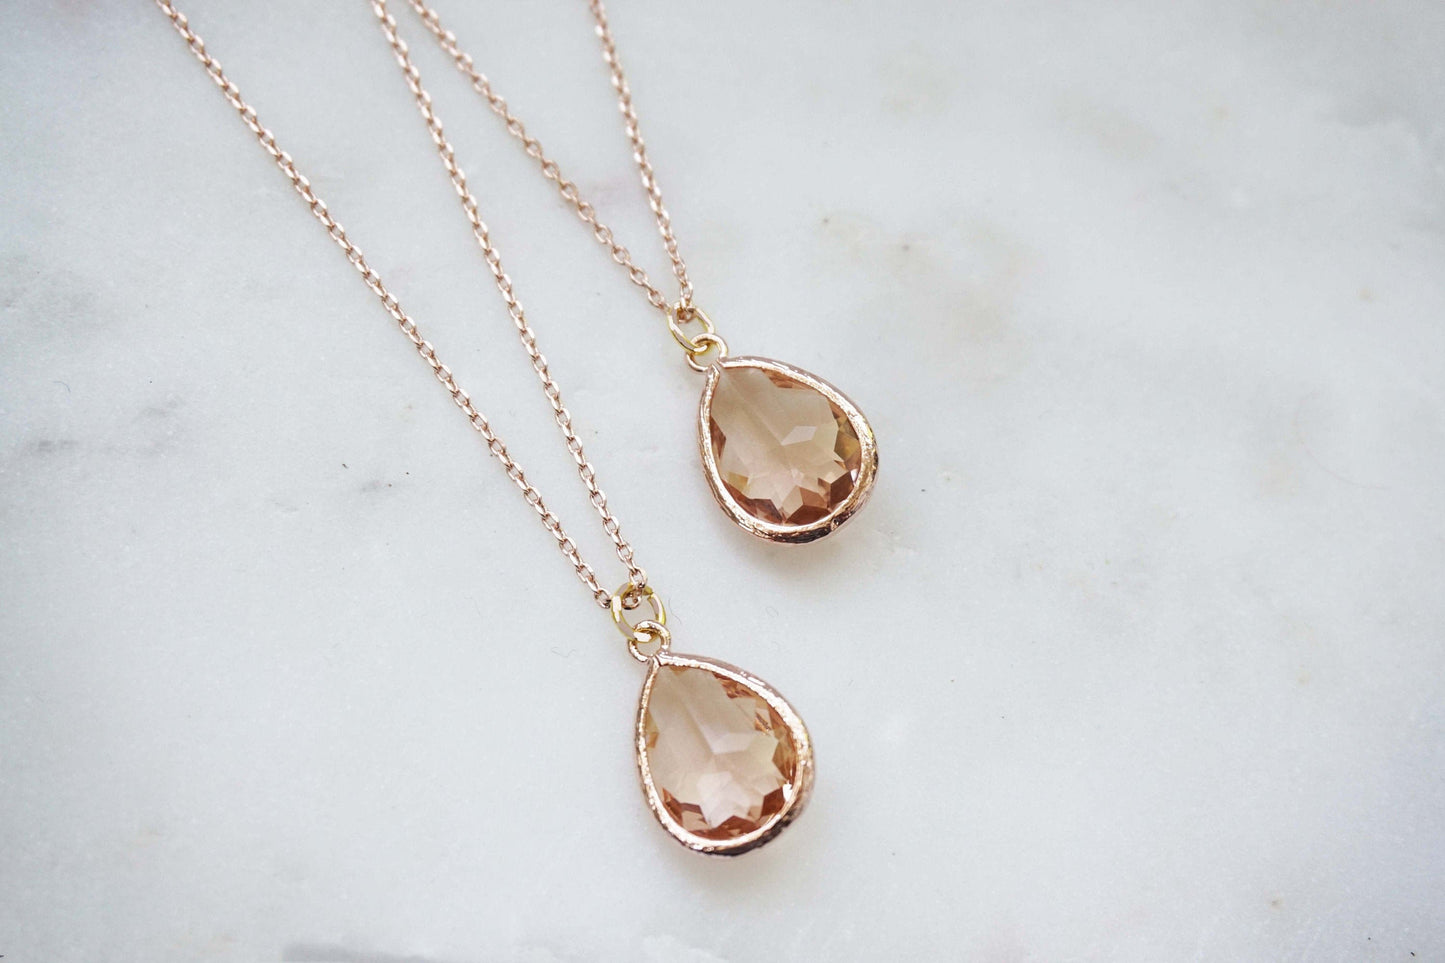 Champagne Gem and Rose Gold Necklace | Bridesmaid Necklaces | Wedding Jewelry | NCHPRG1